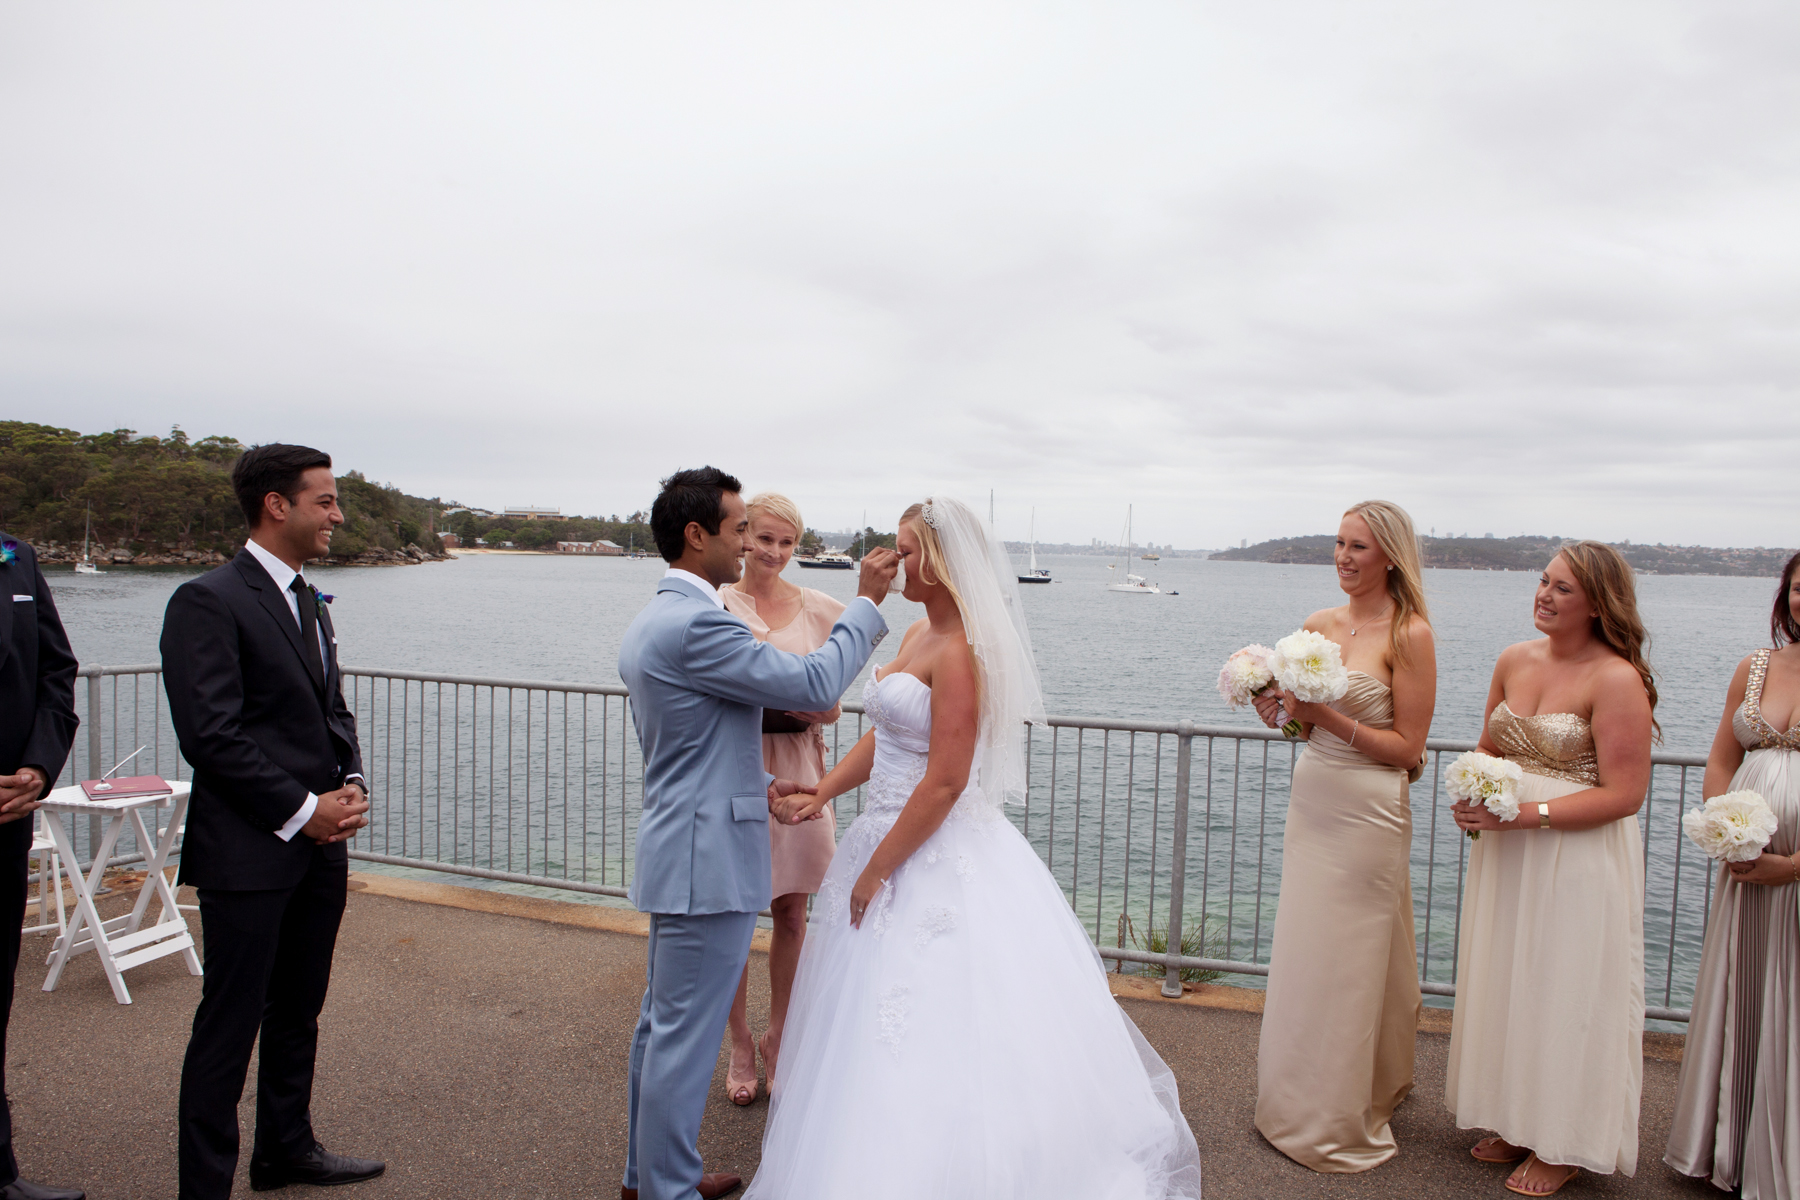 Little Manly Beach, Manly – Wedding